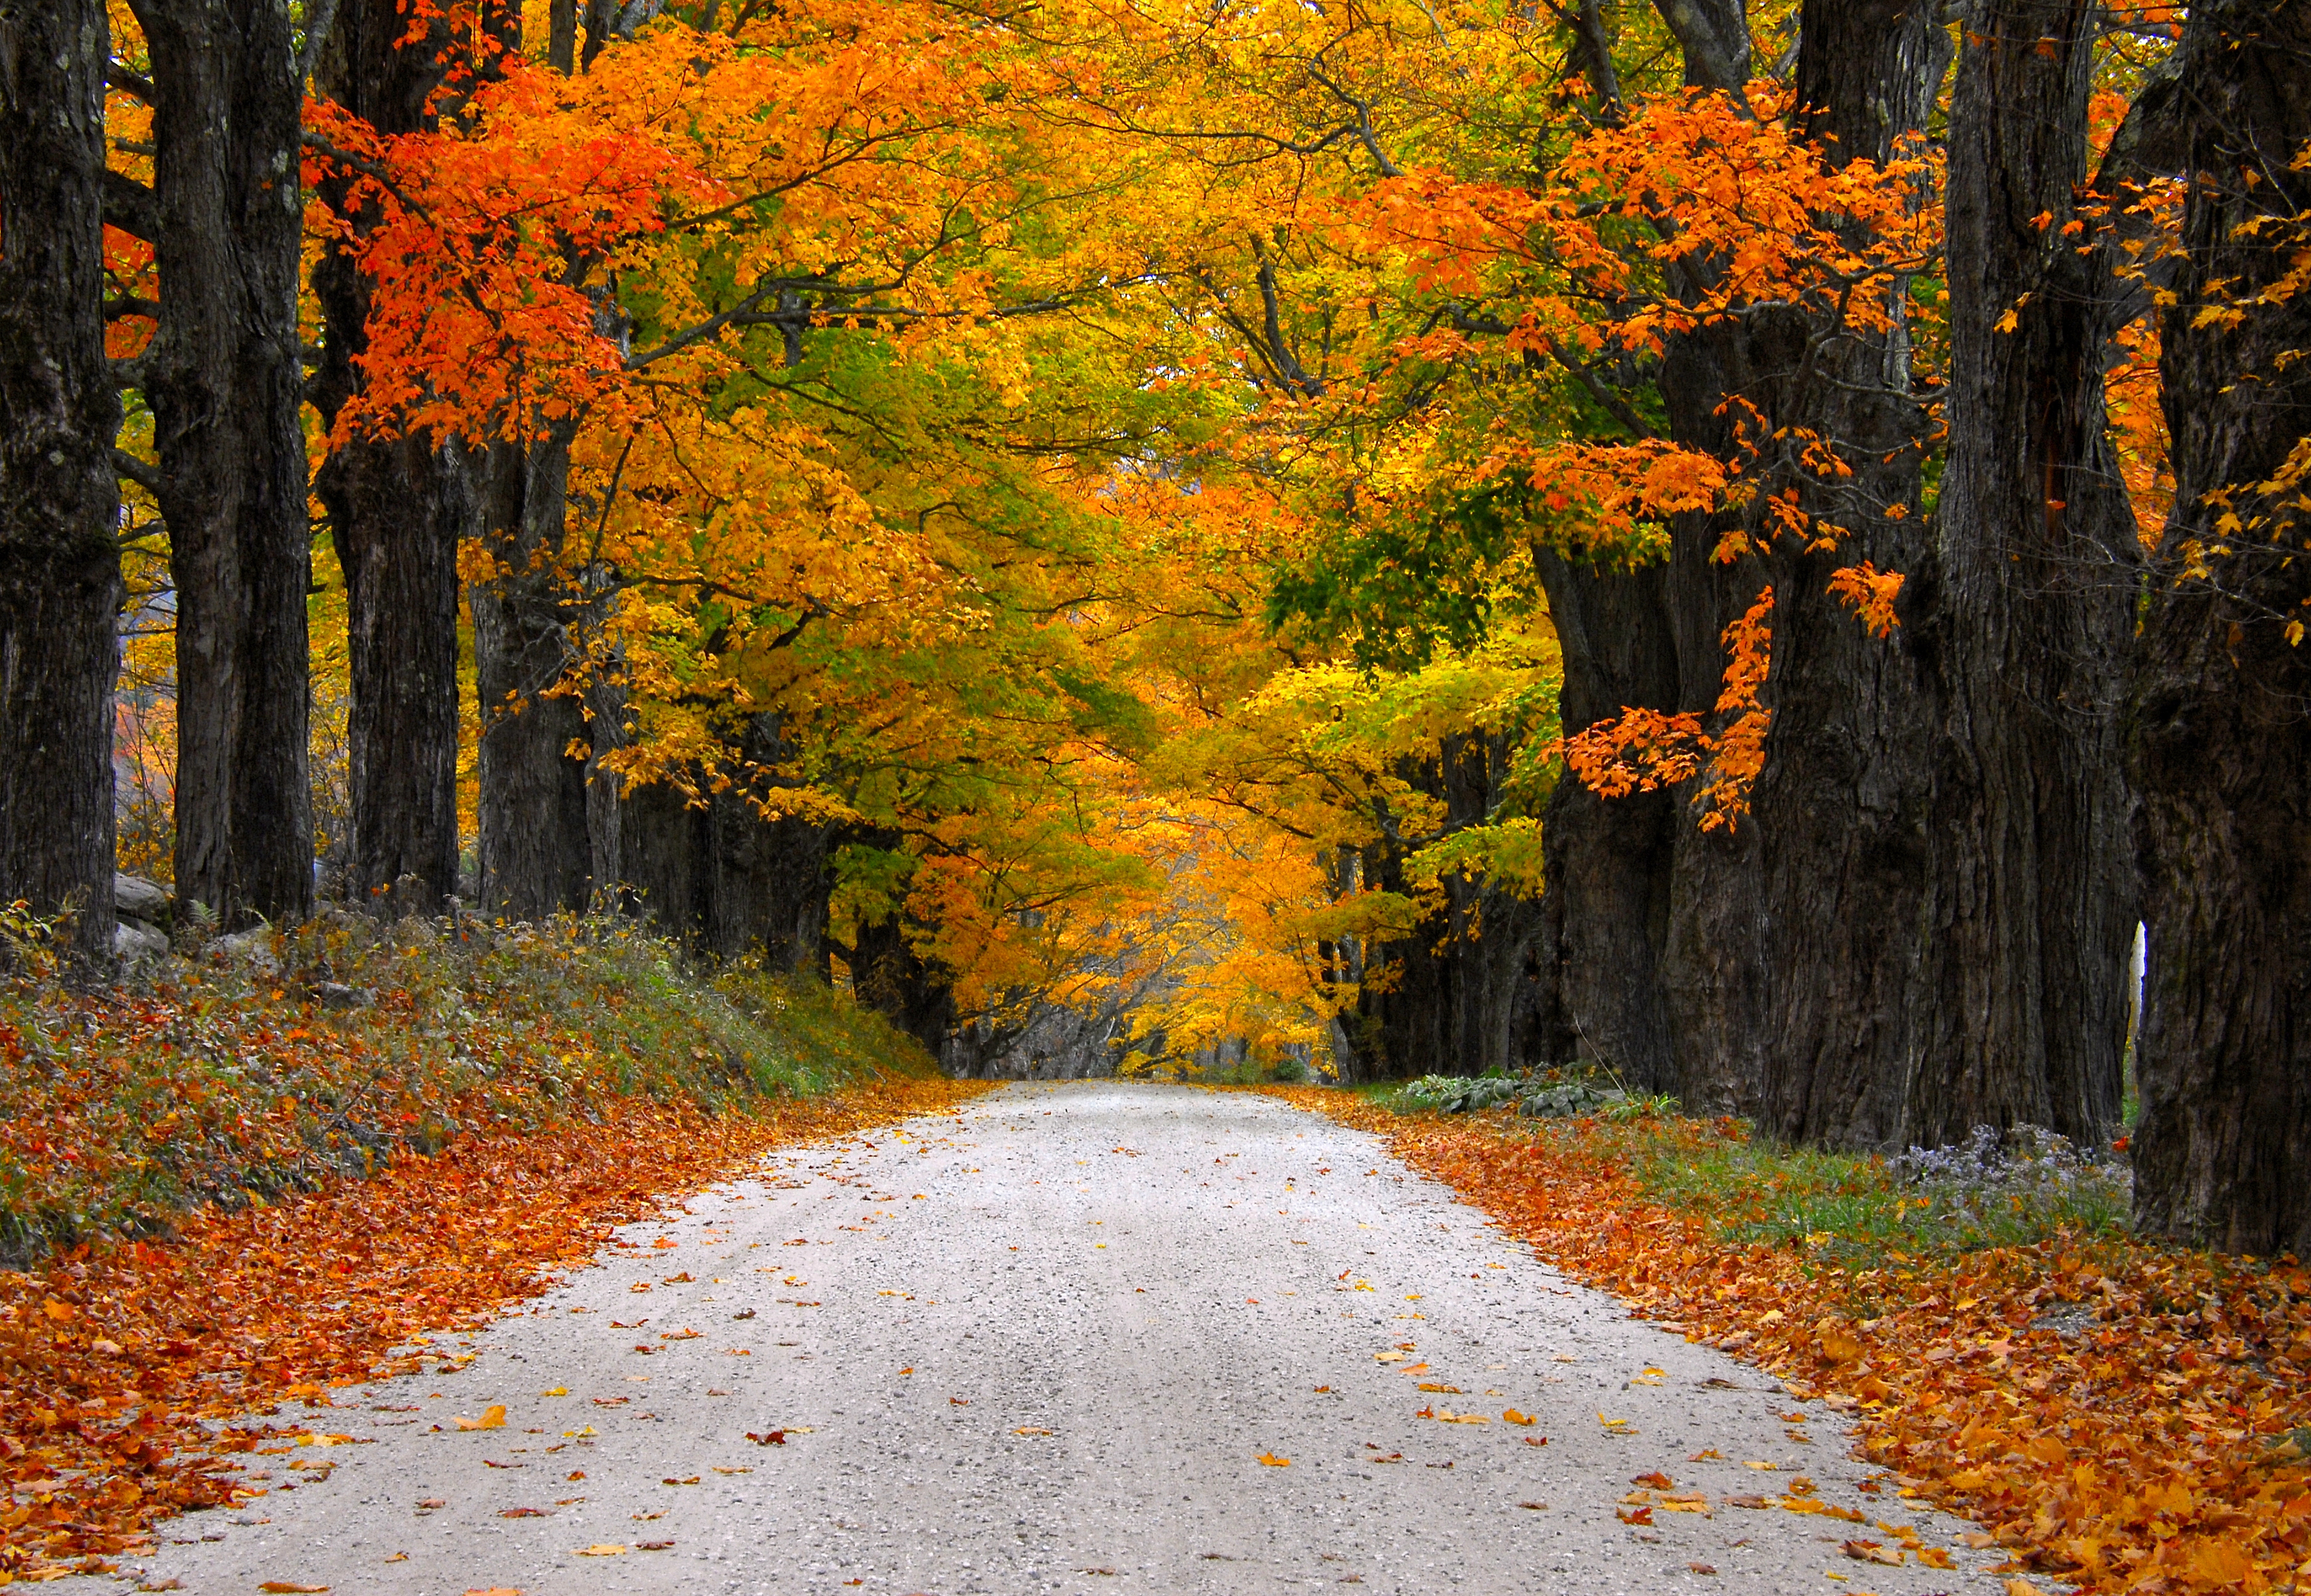 maple leafed trees, road, autumn, leaves, nature, mountain, colors